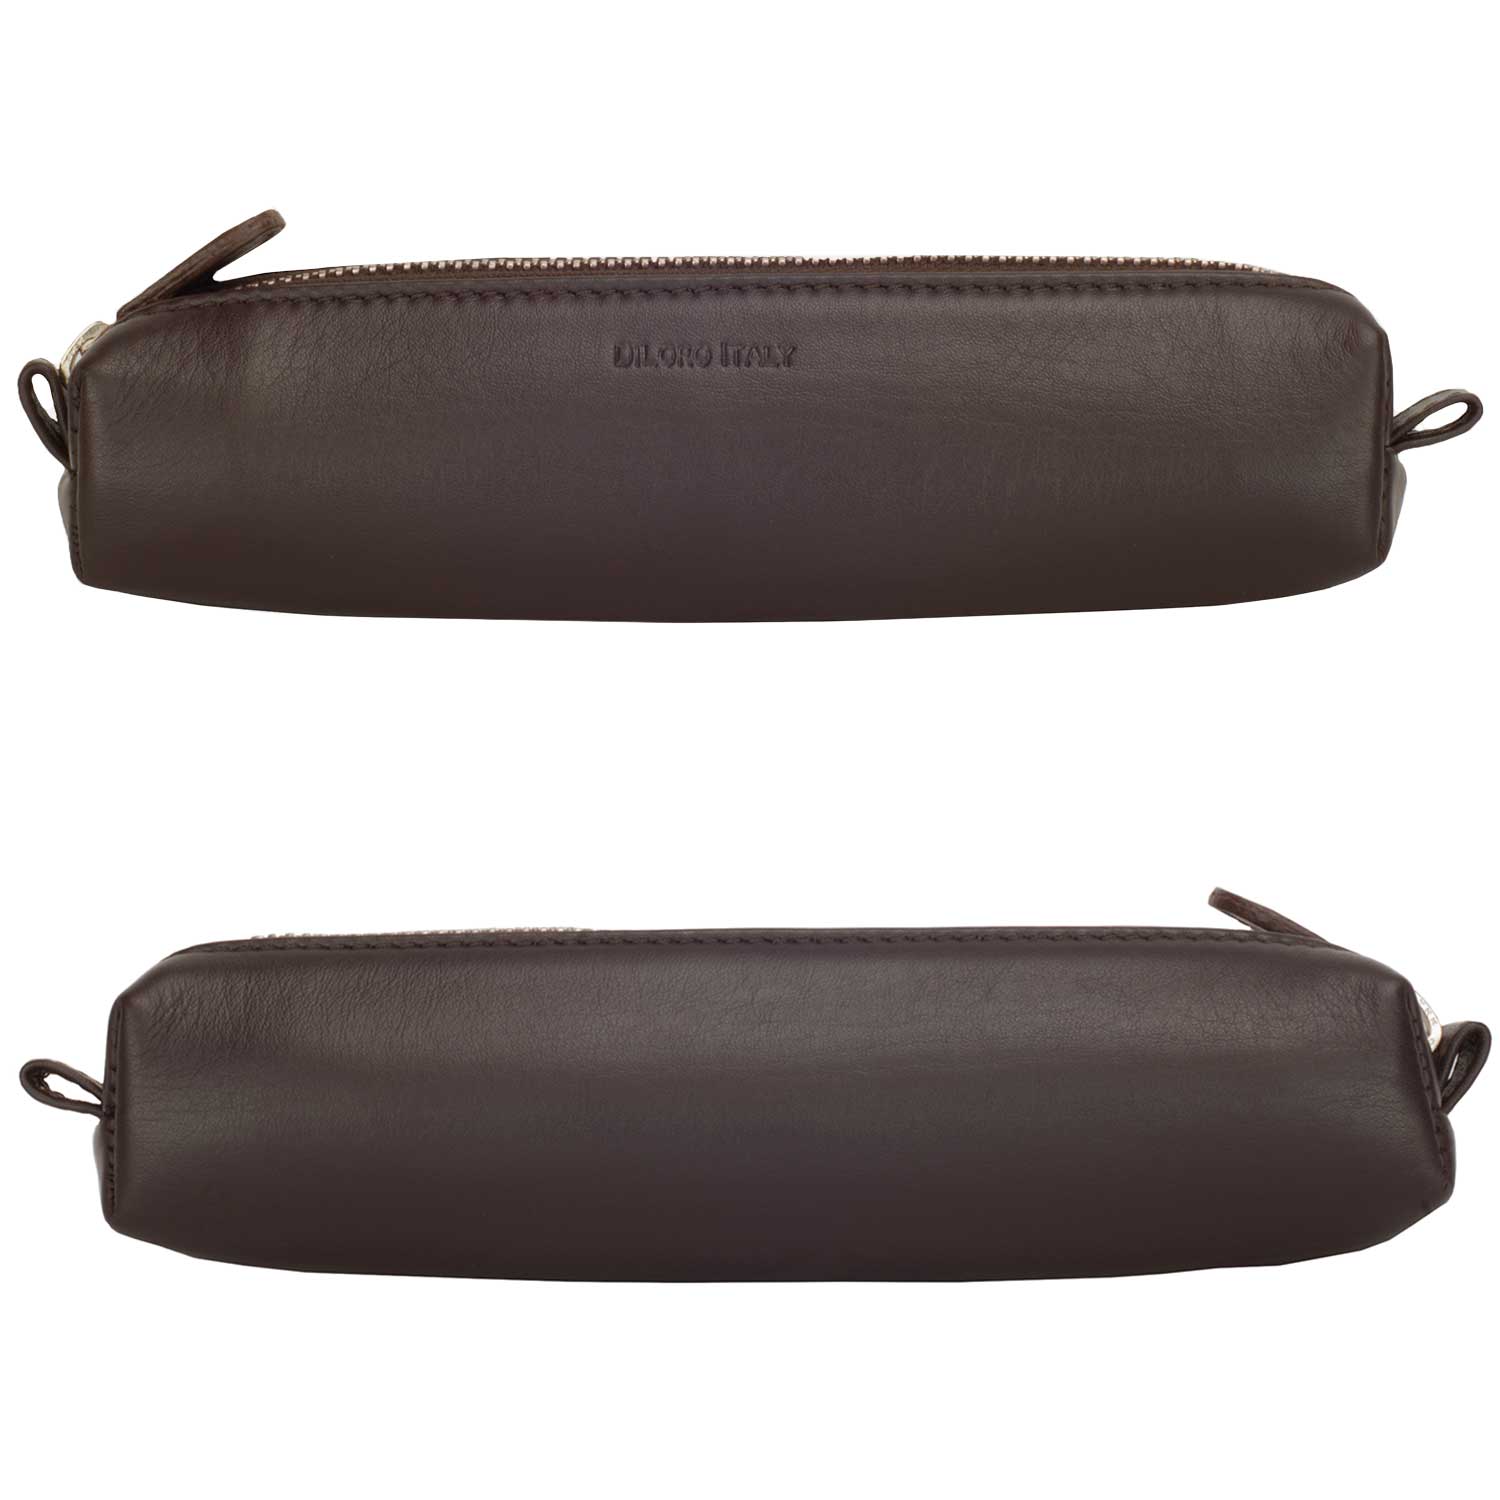 Multi-Purpose Zippered Leather Pen Pencil Case Pouch in Various Colors - Dark Brown (front and back)